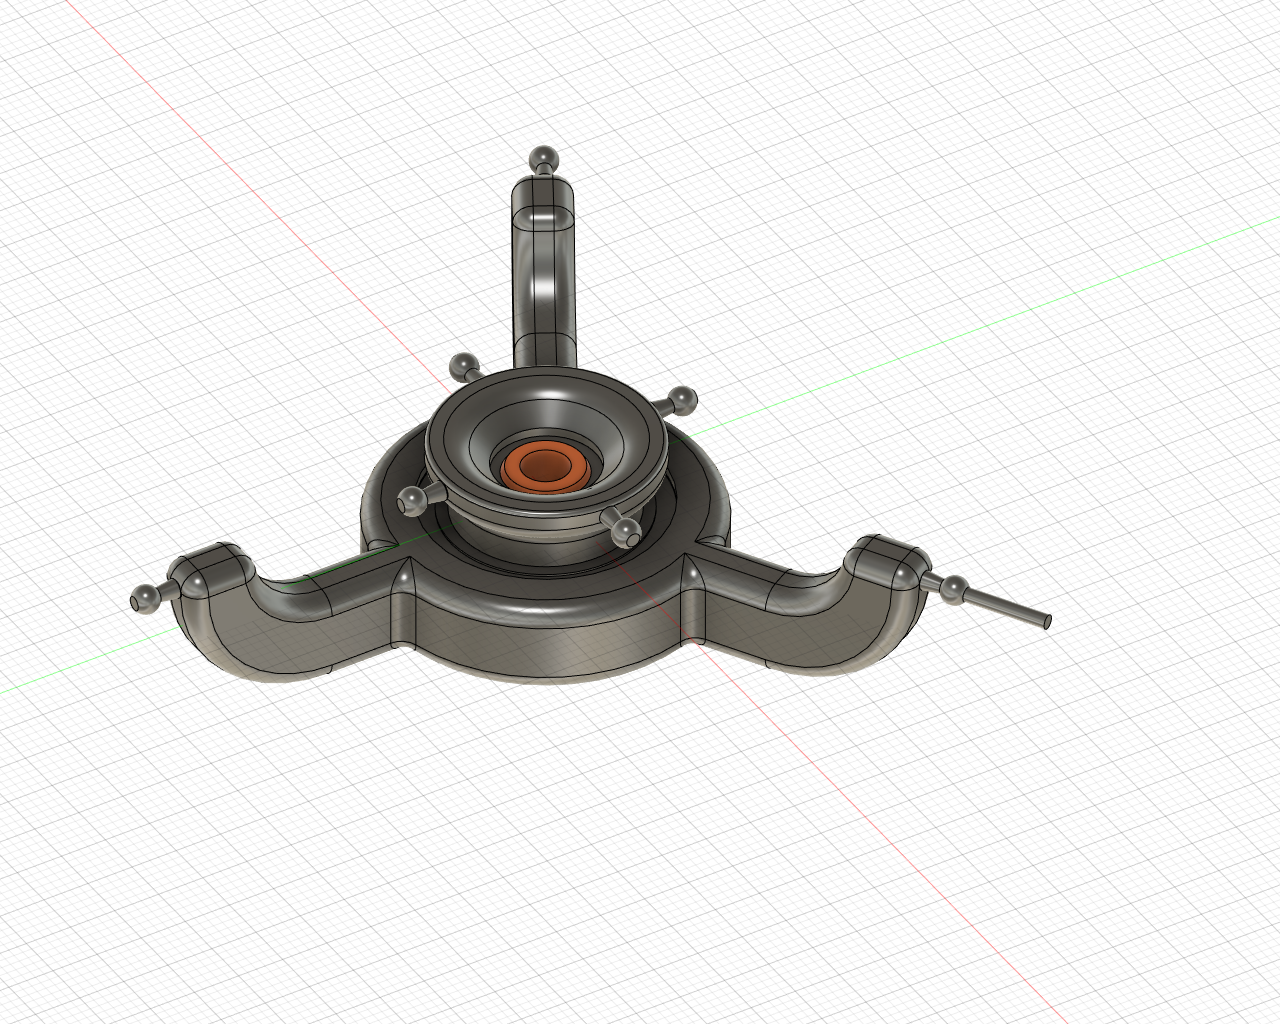 Helicopter Swashplate